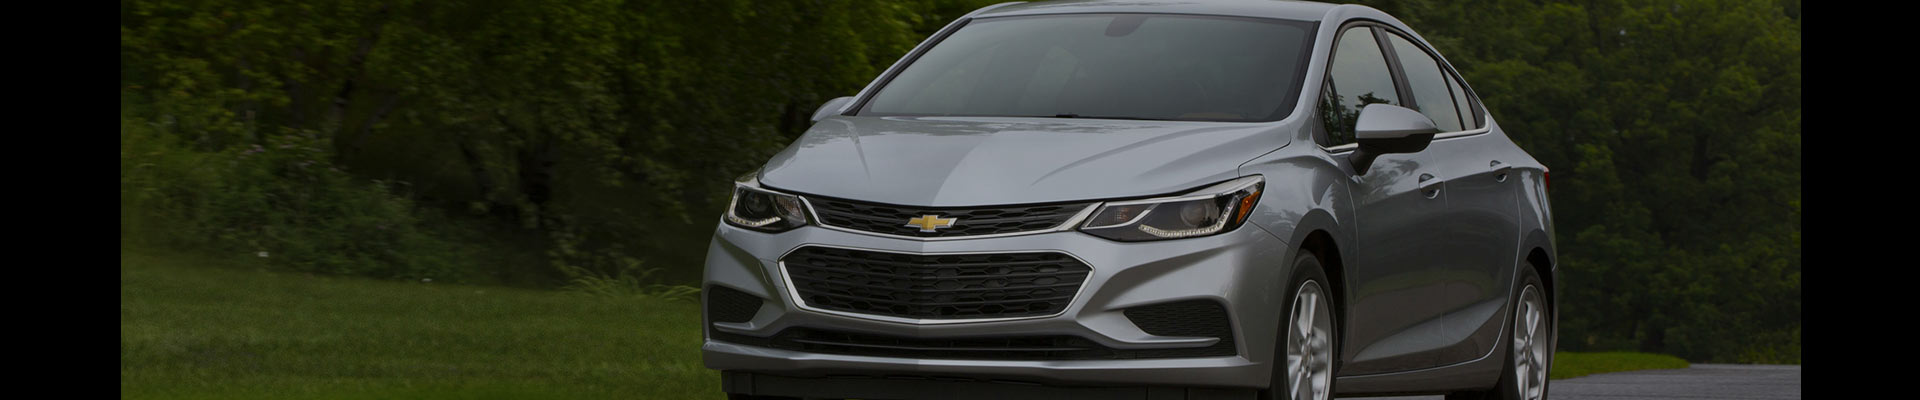 Shop Replacement and OEM 2015 Chevrolet Cruze Parts with Discounted Price on the Net